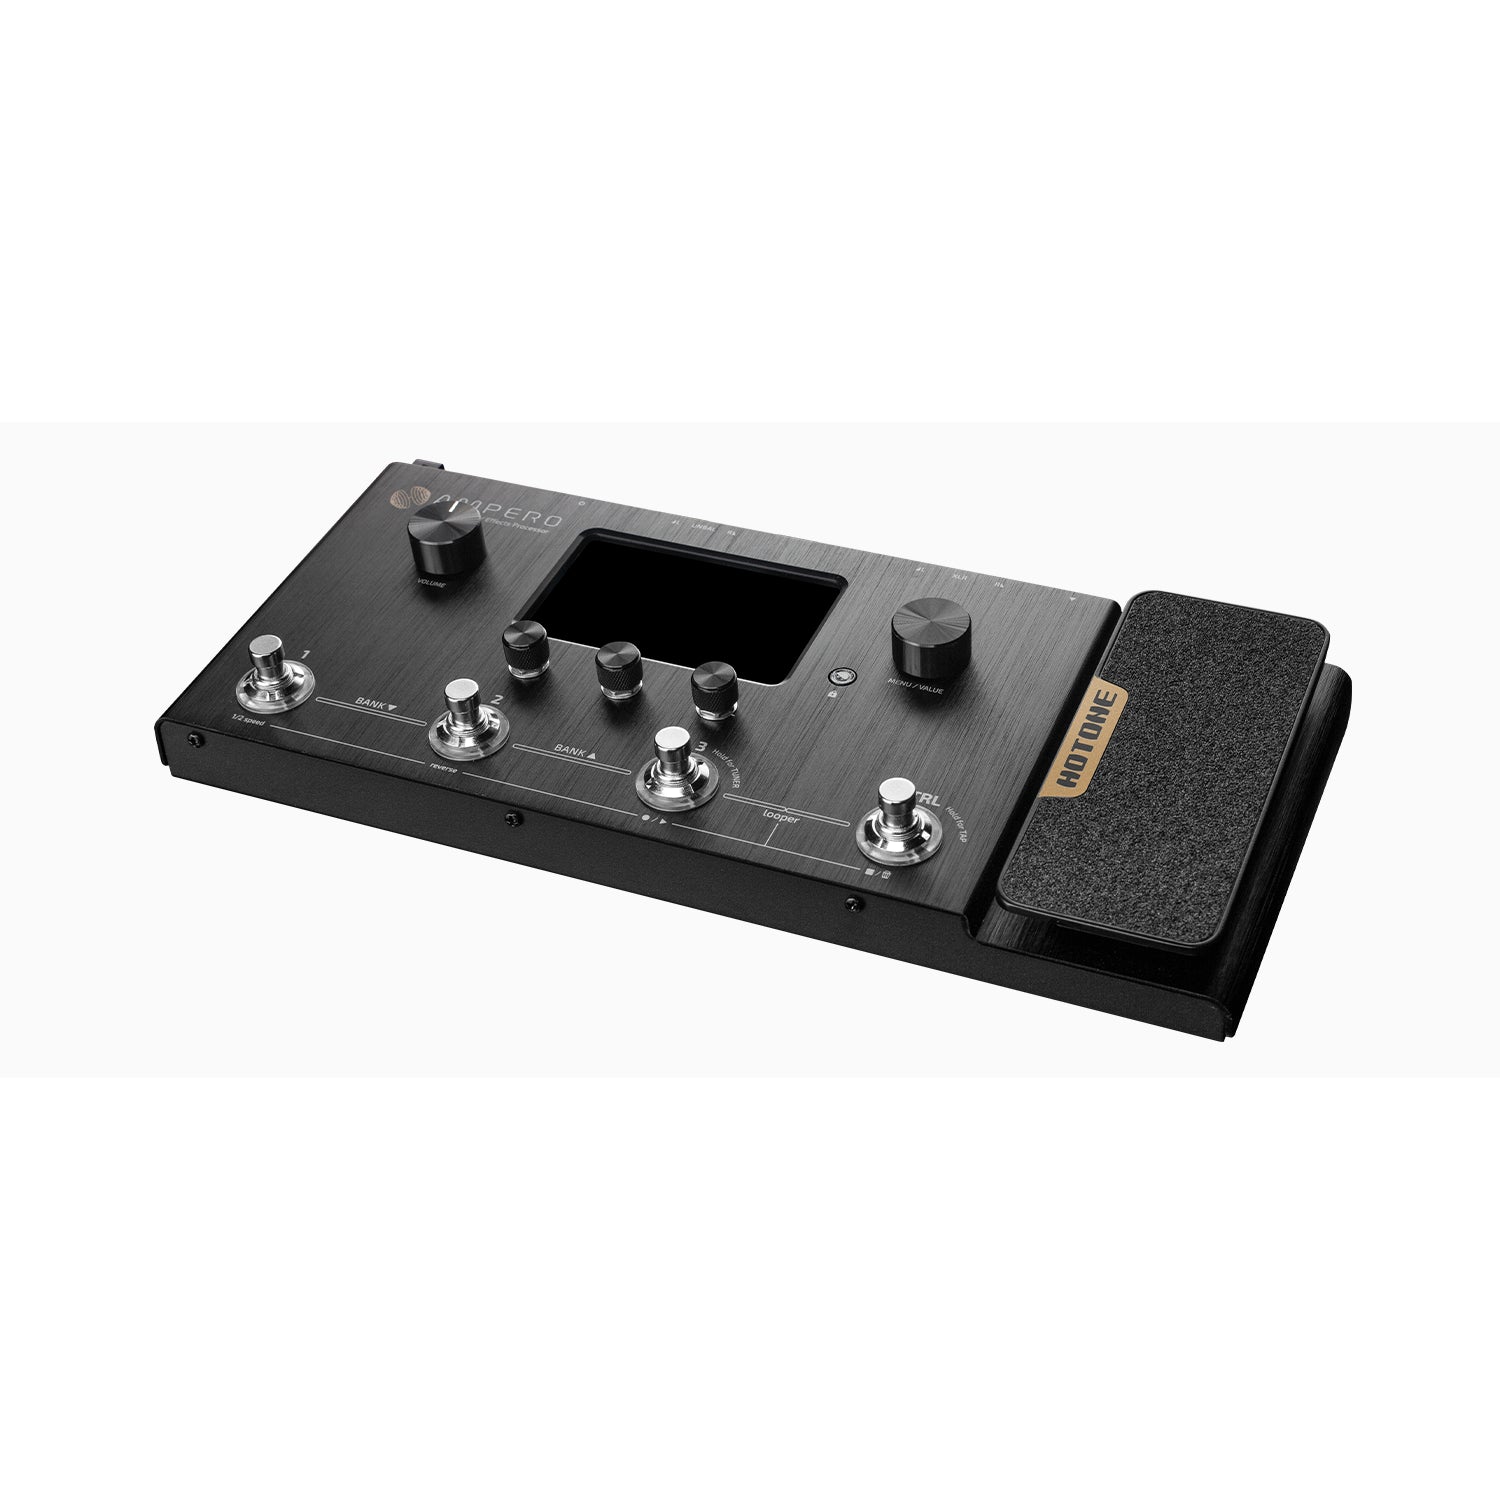 Pedal Guitar Hotone Ampero MP100-Việt Music